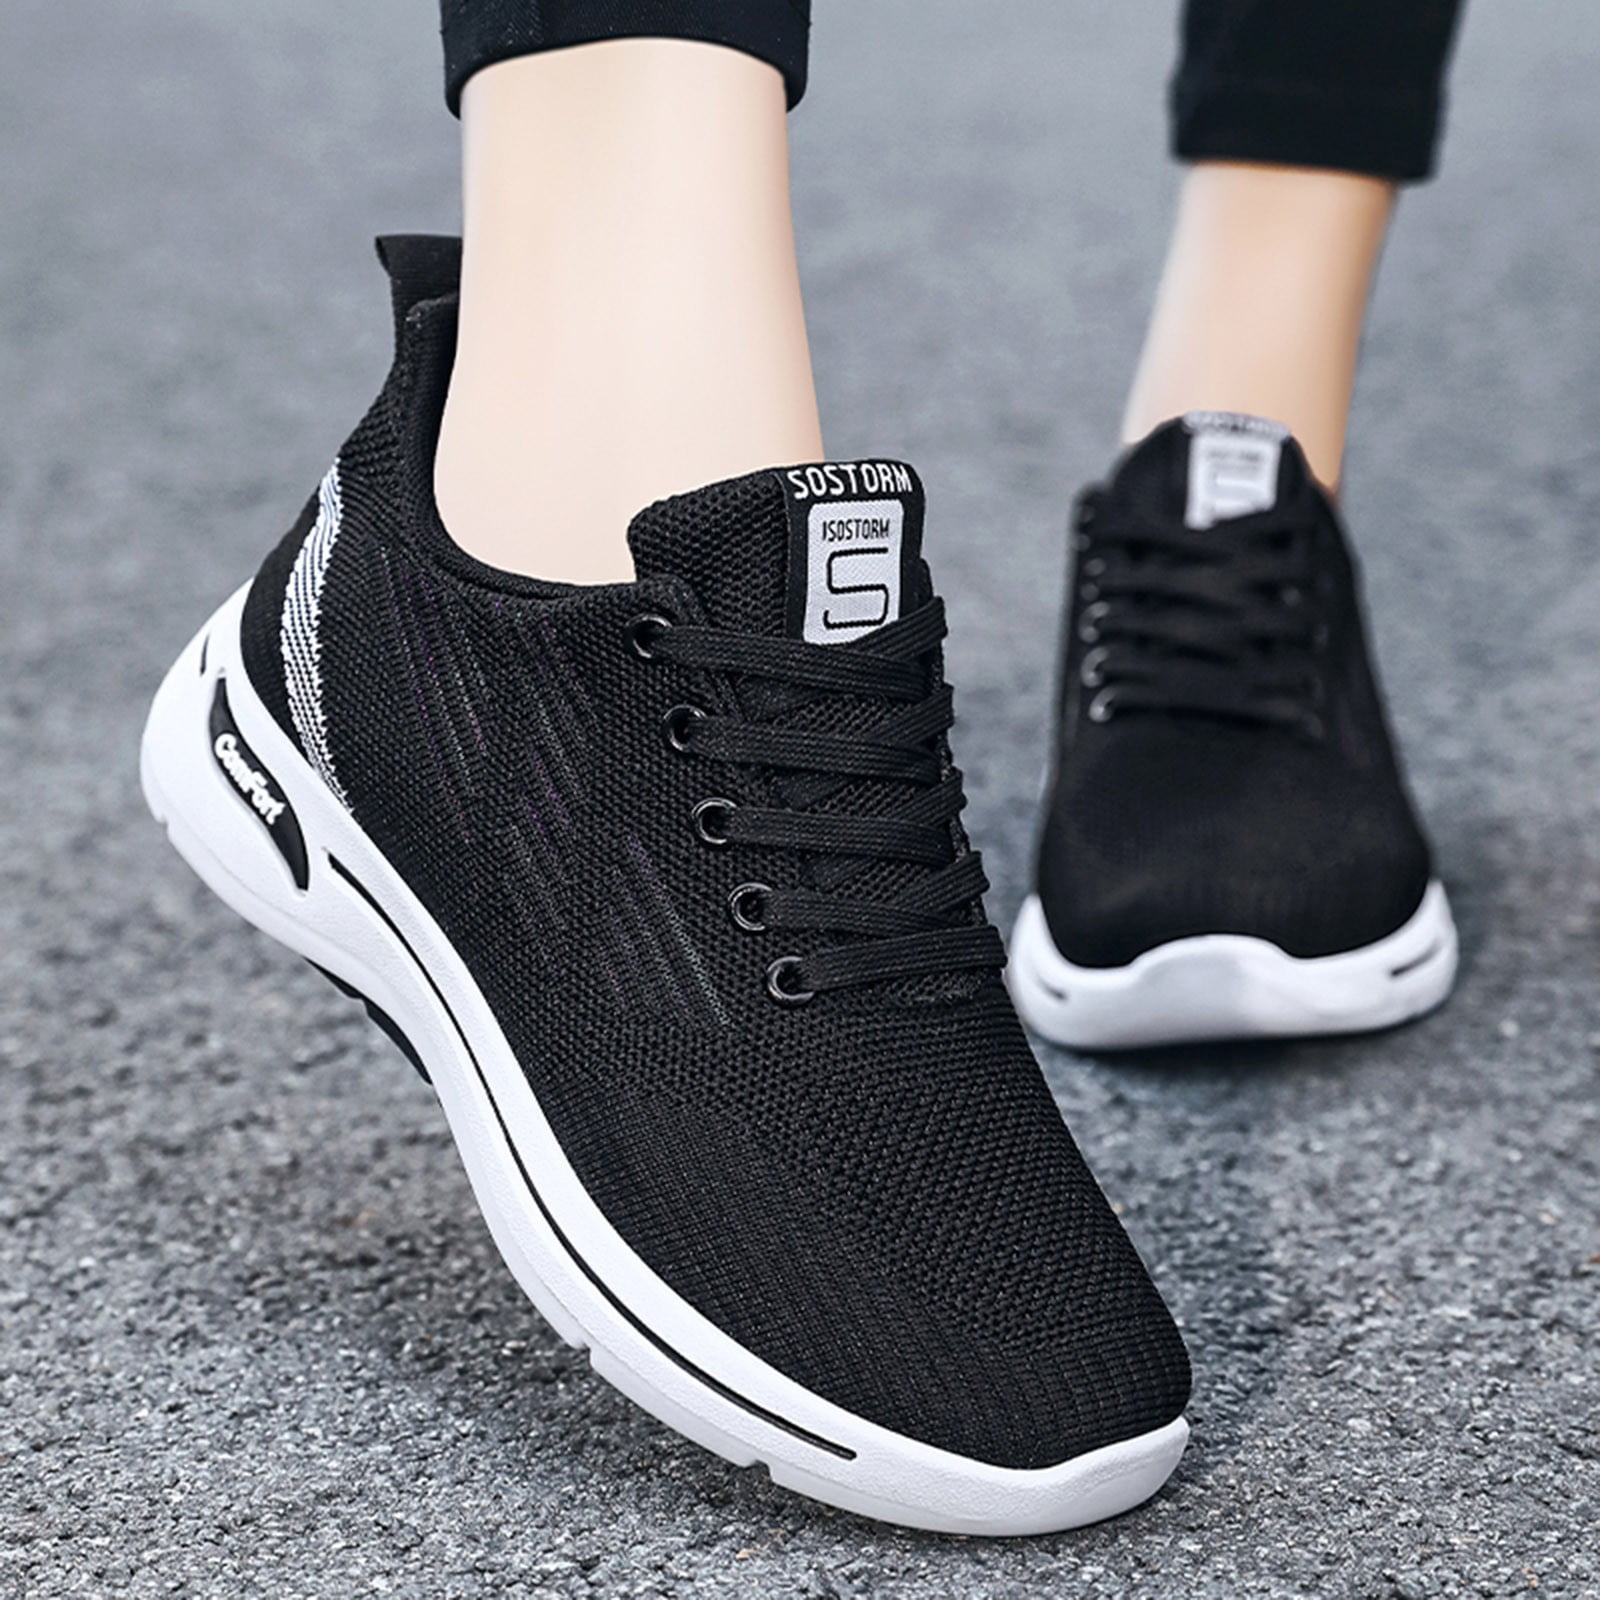 Gubotare Winter Shoes For Women Womens Canvas Shoes Casual Cute Sneakers  Low Cut Lace up Fashion Comfortable for Walking,Black 7 - Walmart.com